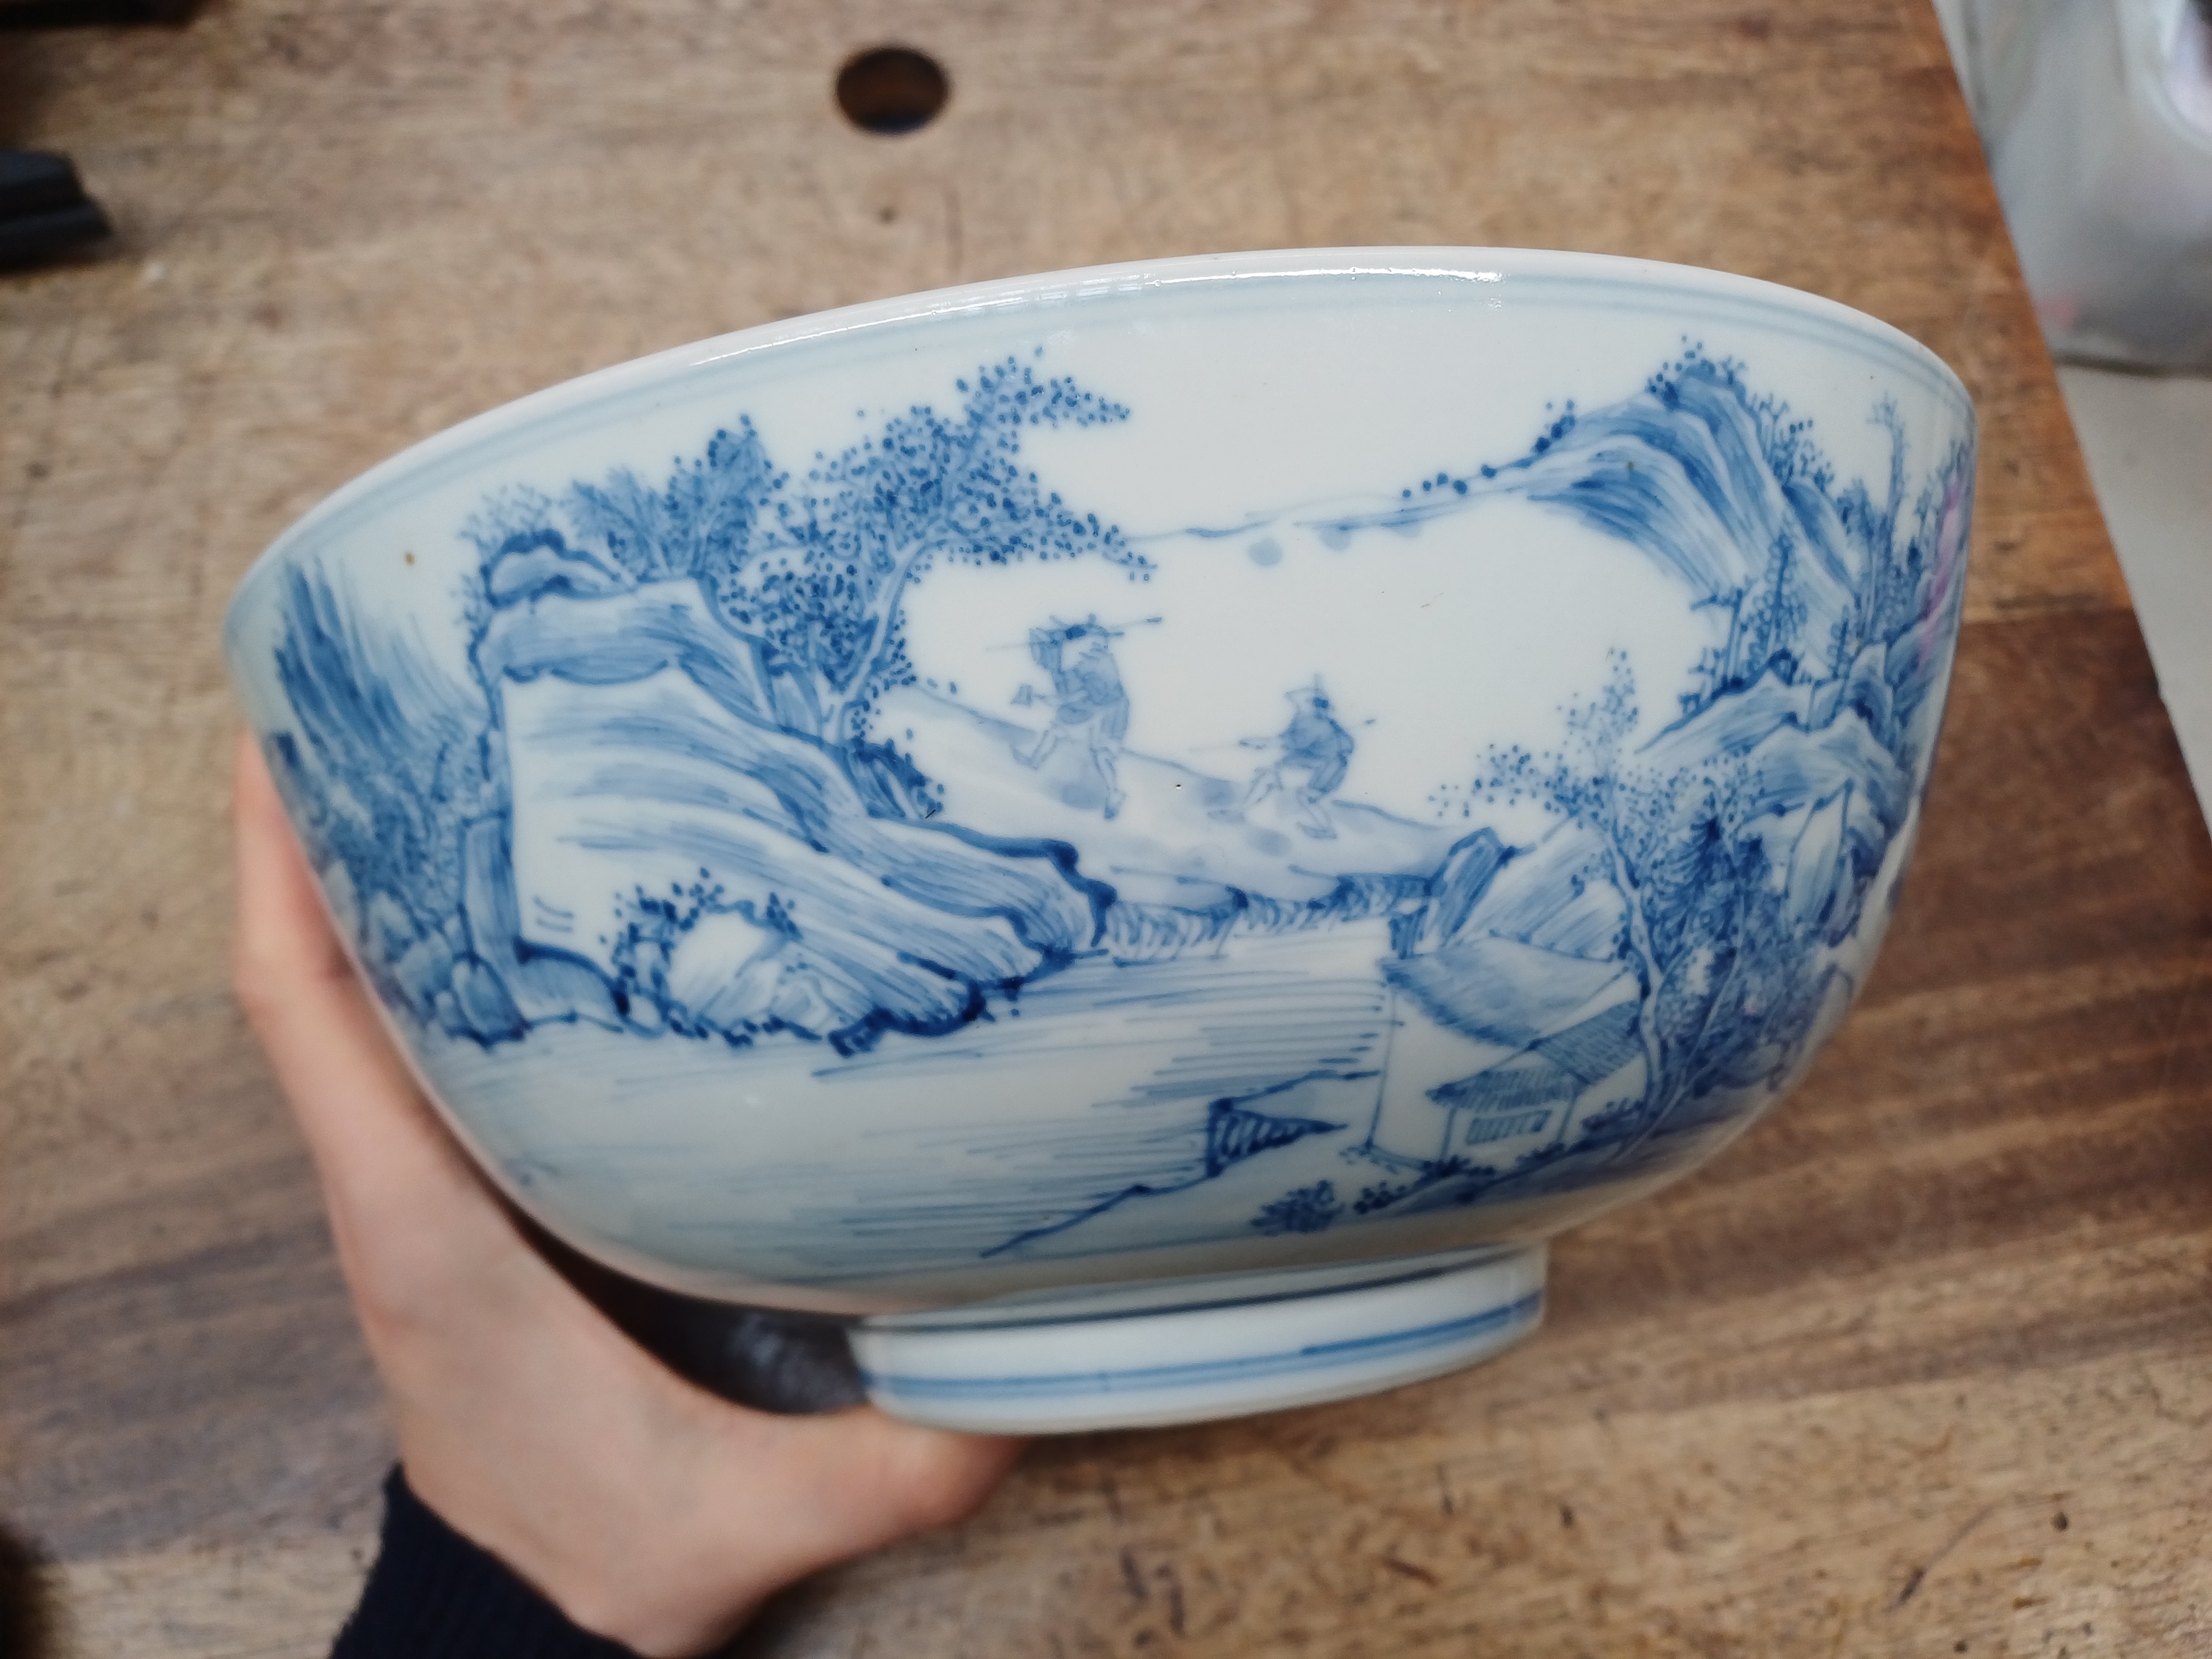 A RARE CHINESE BLUE AND WHITE 'MASTER OF THE ROCKS' BOWL 清康熙或雍正 青花山水人物圖紋盌 - Image 6 of 19